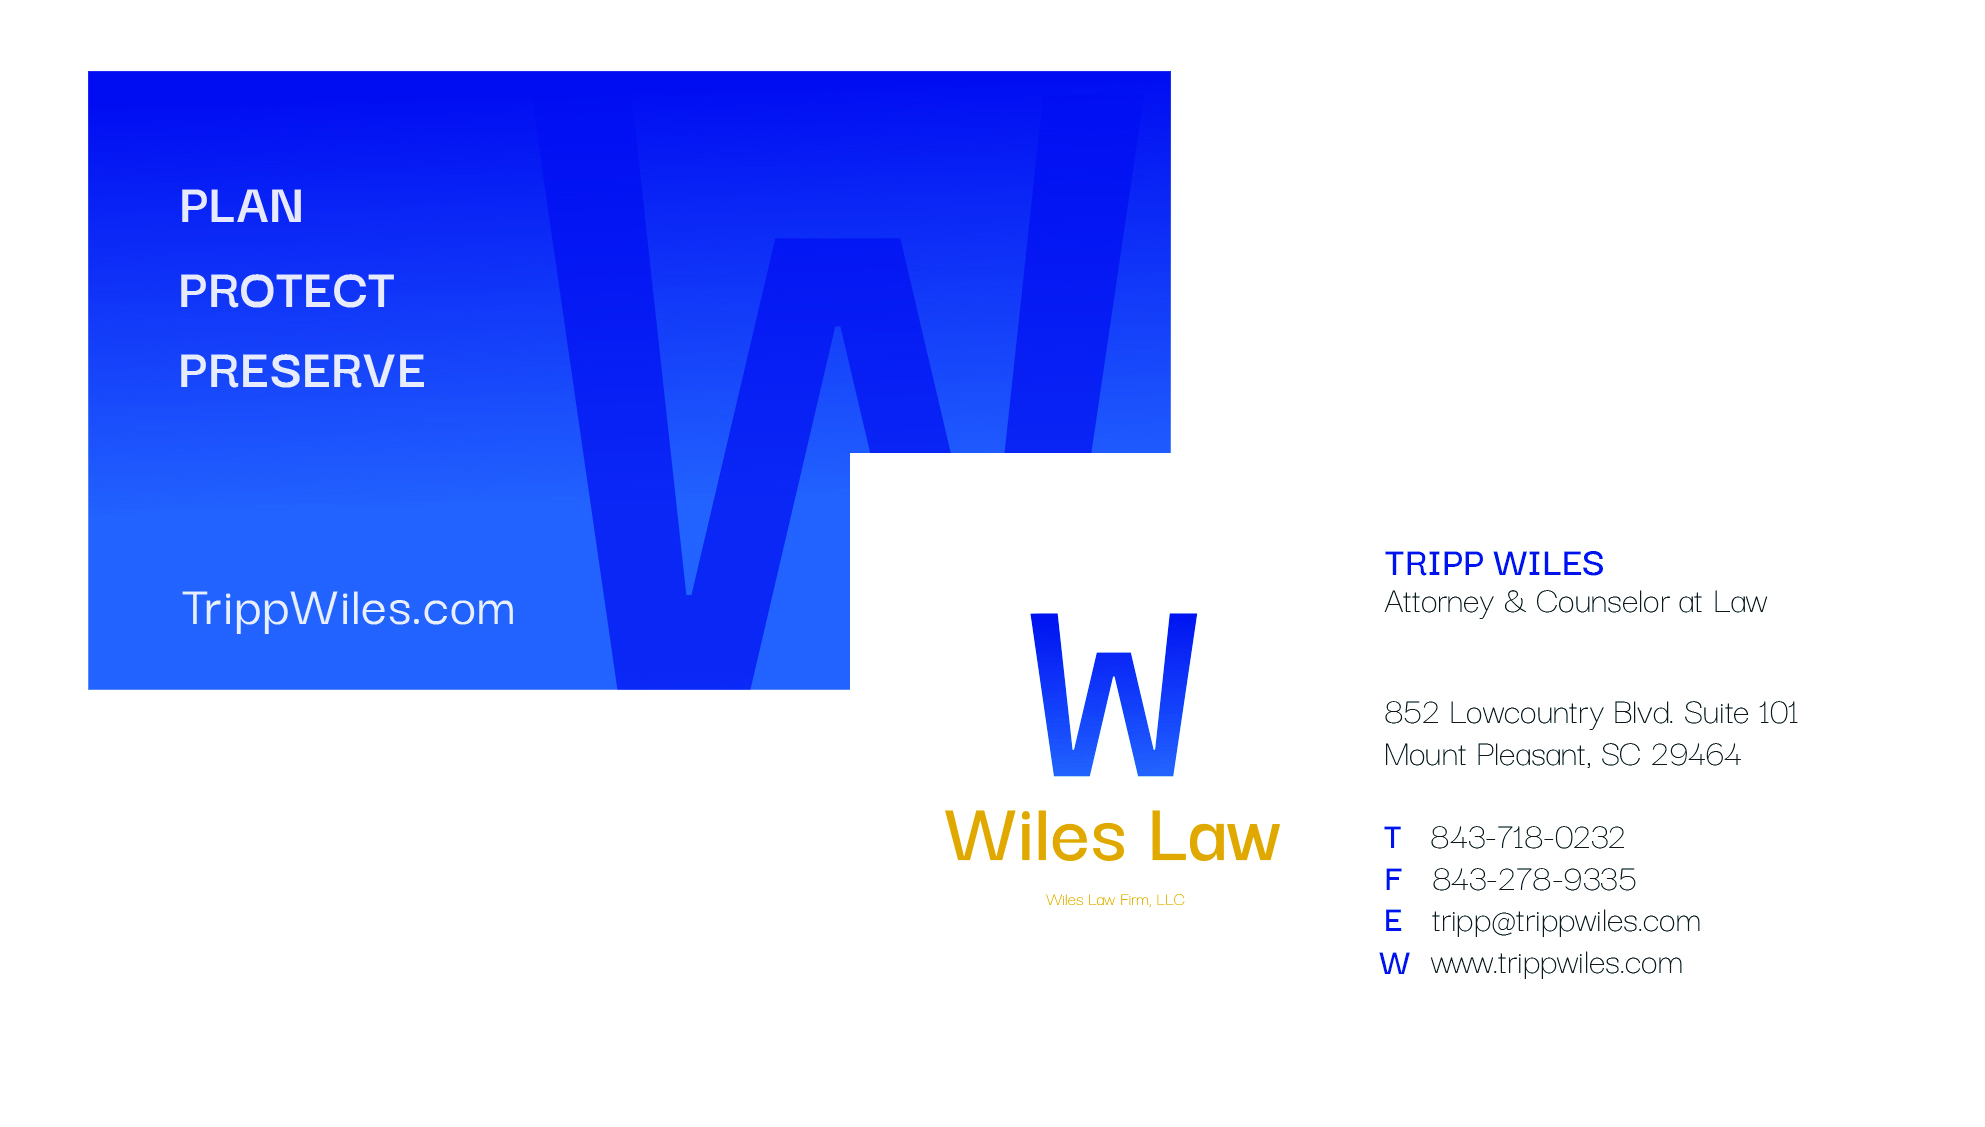 Wiles Law Business Cards